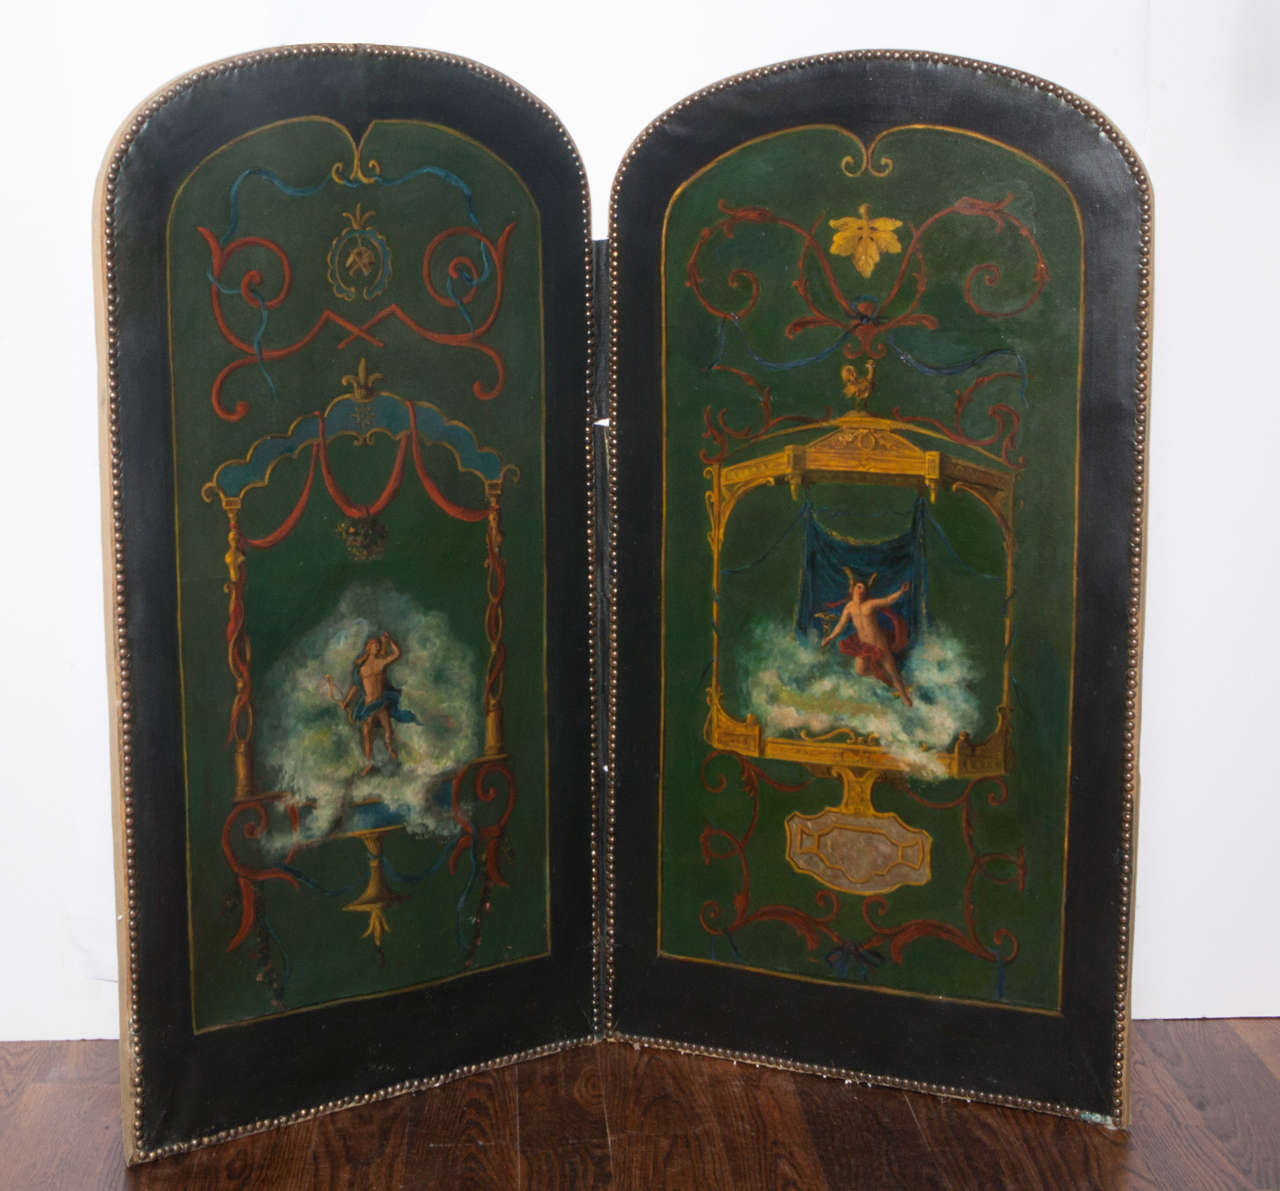 Two panel folding screen with oil paintings depicting mythological male figures.  Back of screen is upholstered in silk damask.  Brass nailhead trim.  Fabric hinges.